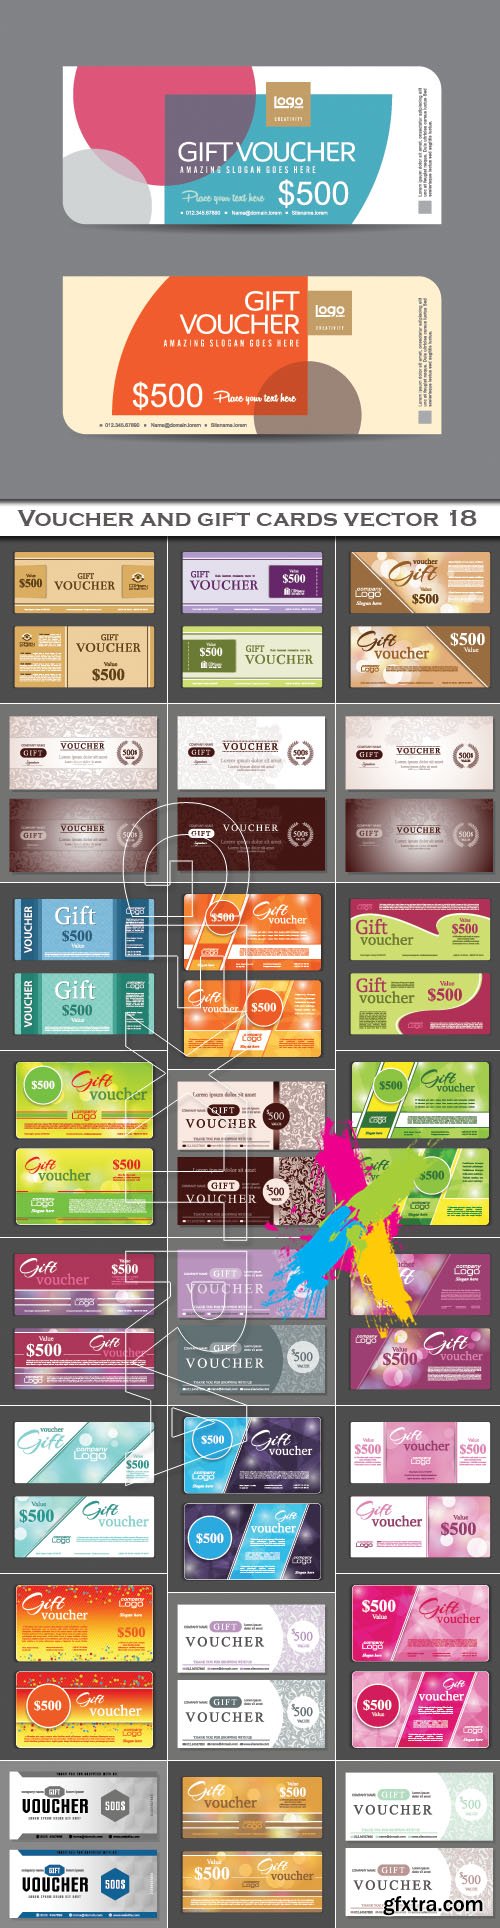 Voucher and gift cards vector 18